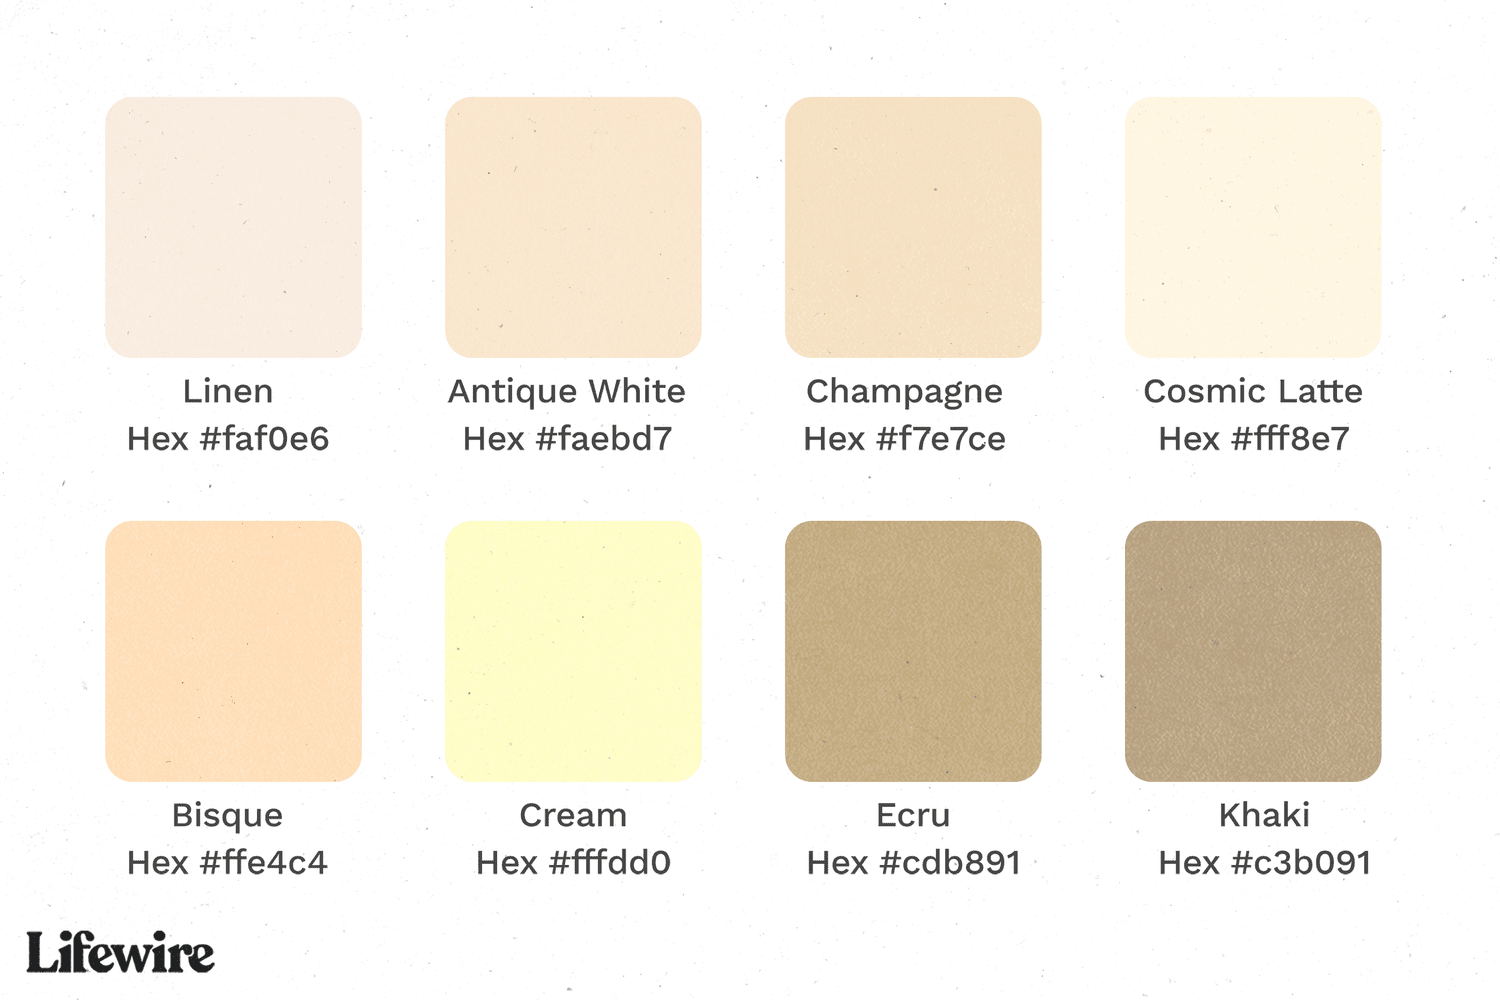 beige color meanings